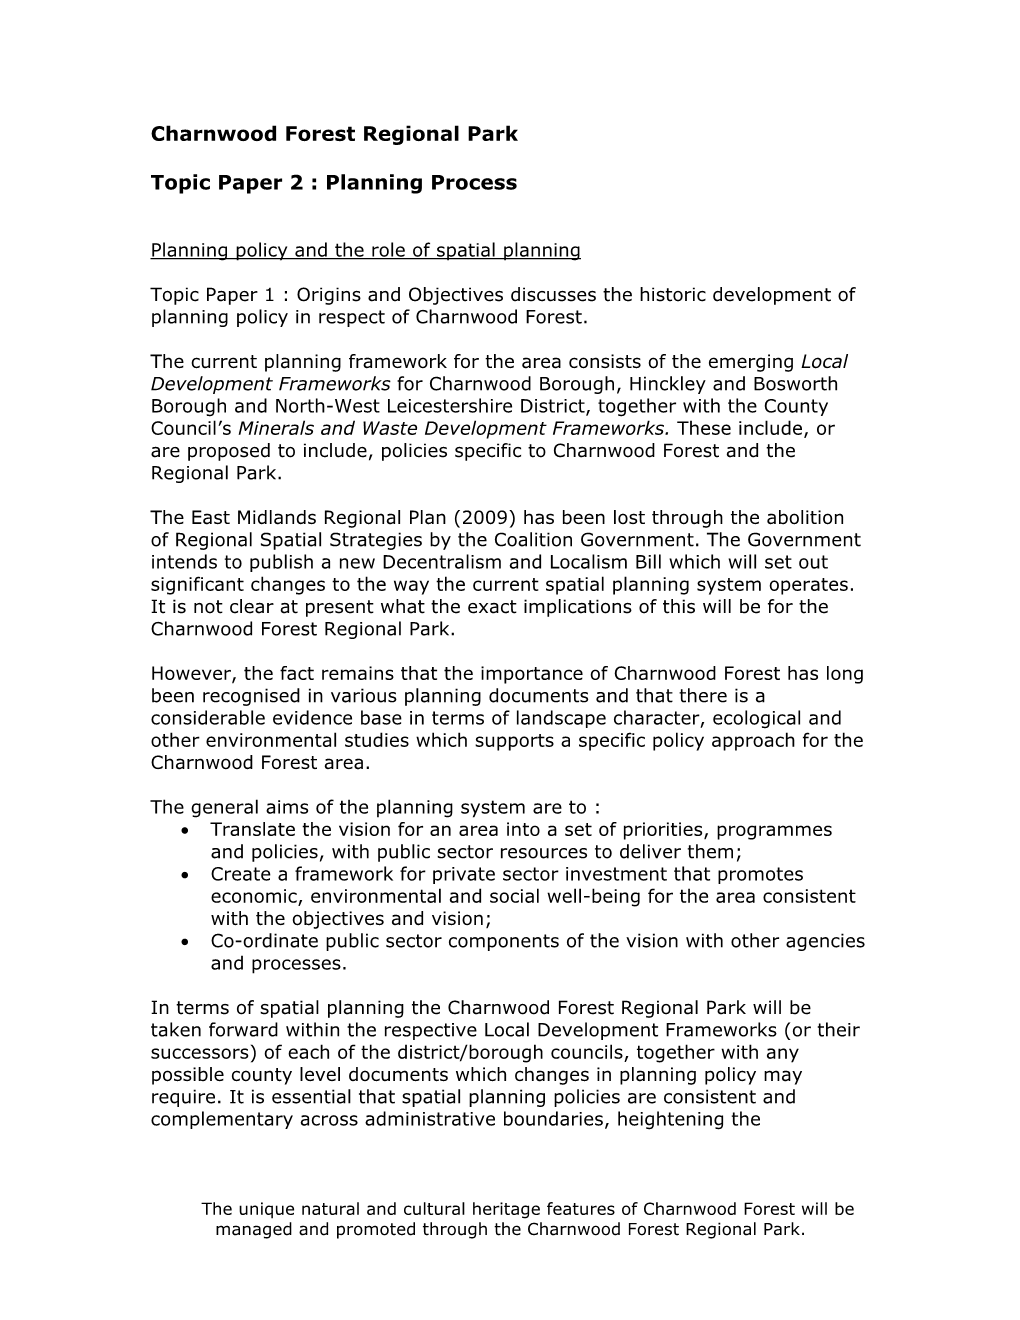 Charnwood Forest Regional Park Topic Paper 2 : Planning Process